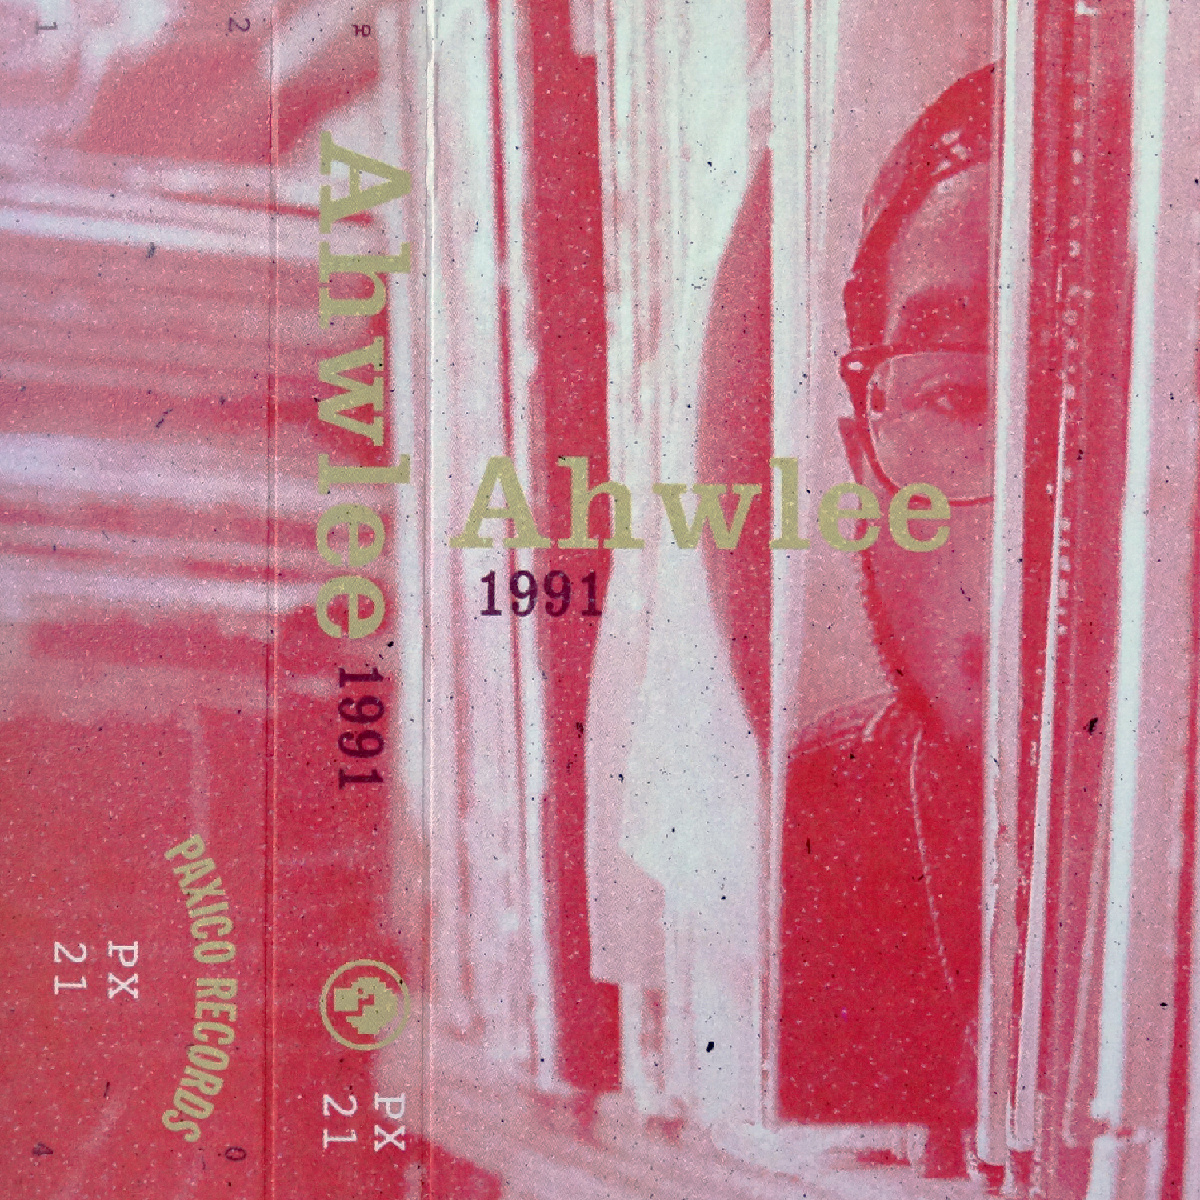 Ahwlee "1991" Release | @ahwlee @paxicorecords